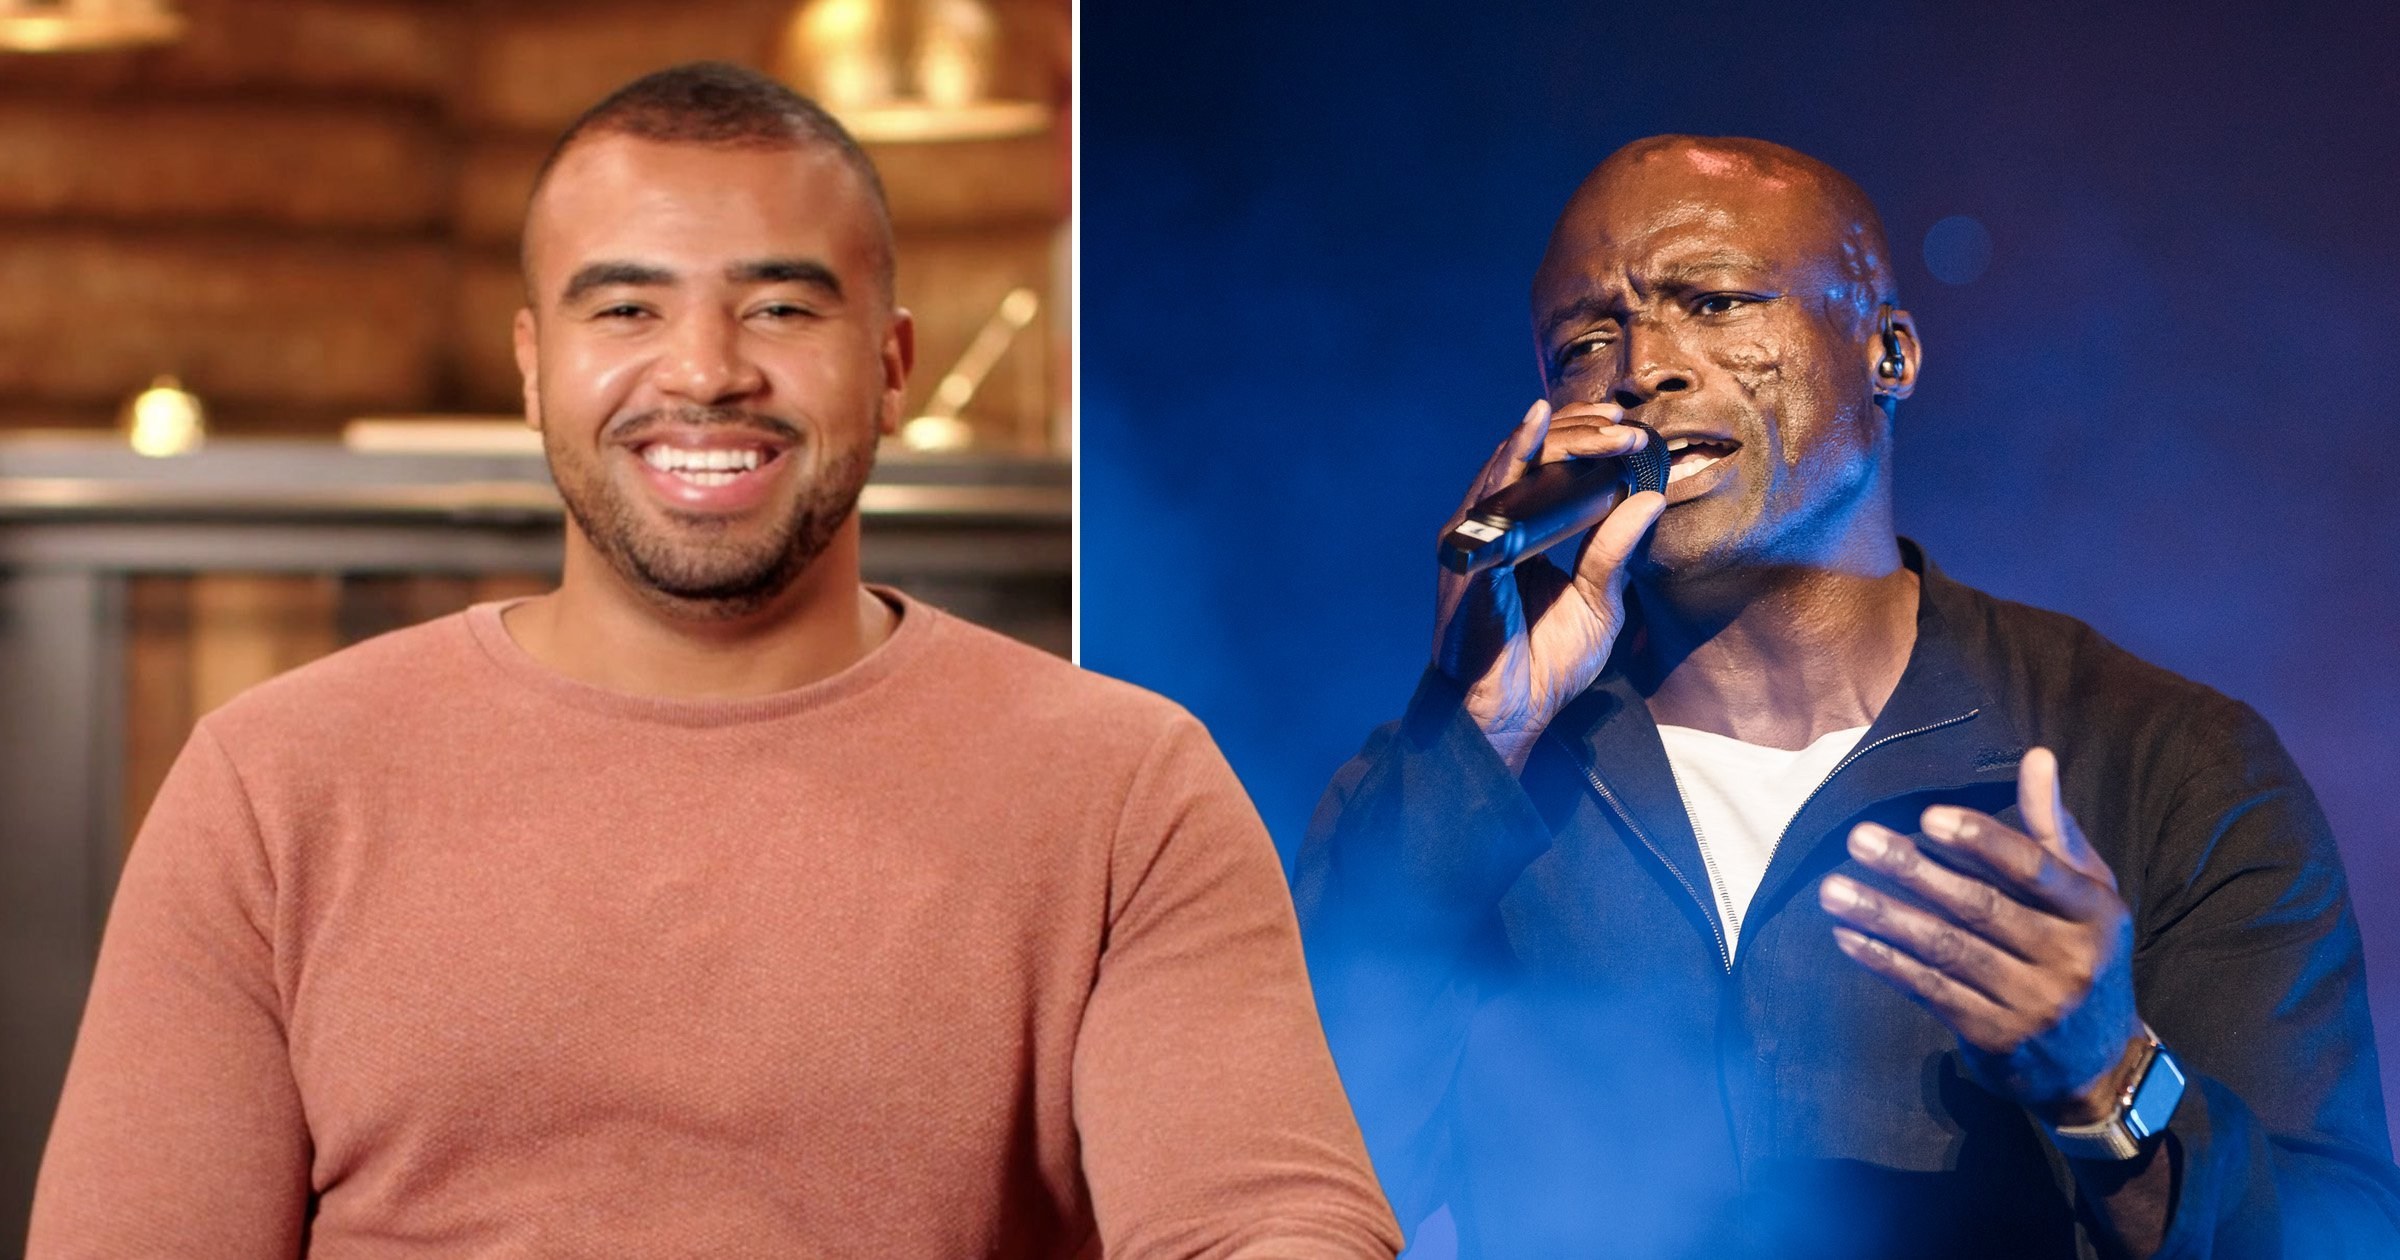 The Cabins: Seal’s cousin joins show as new arrival